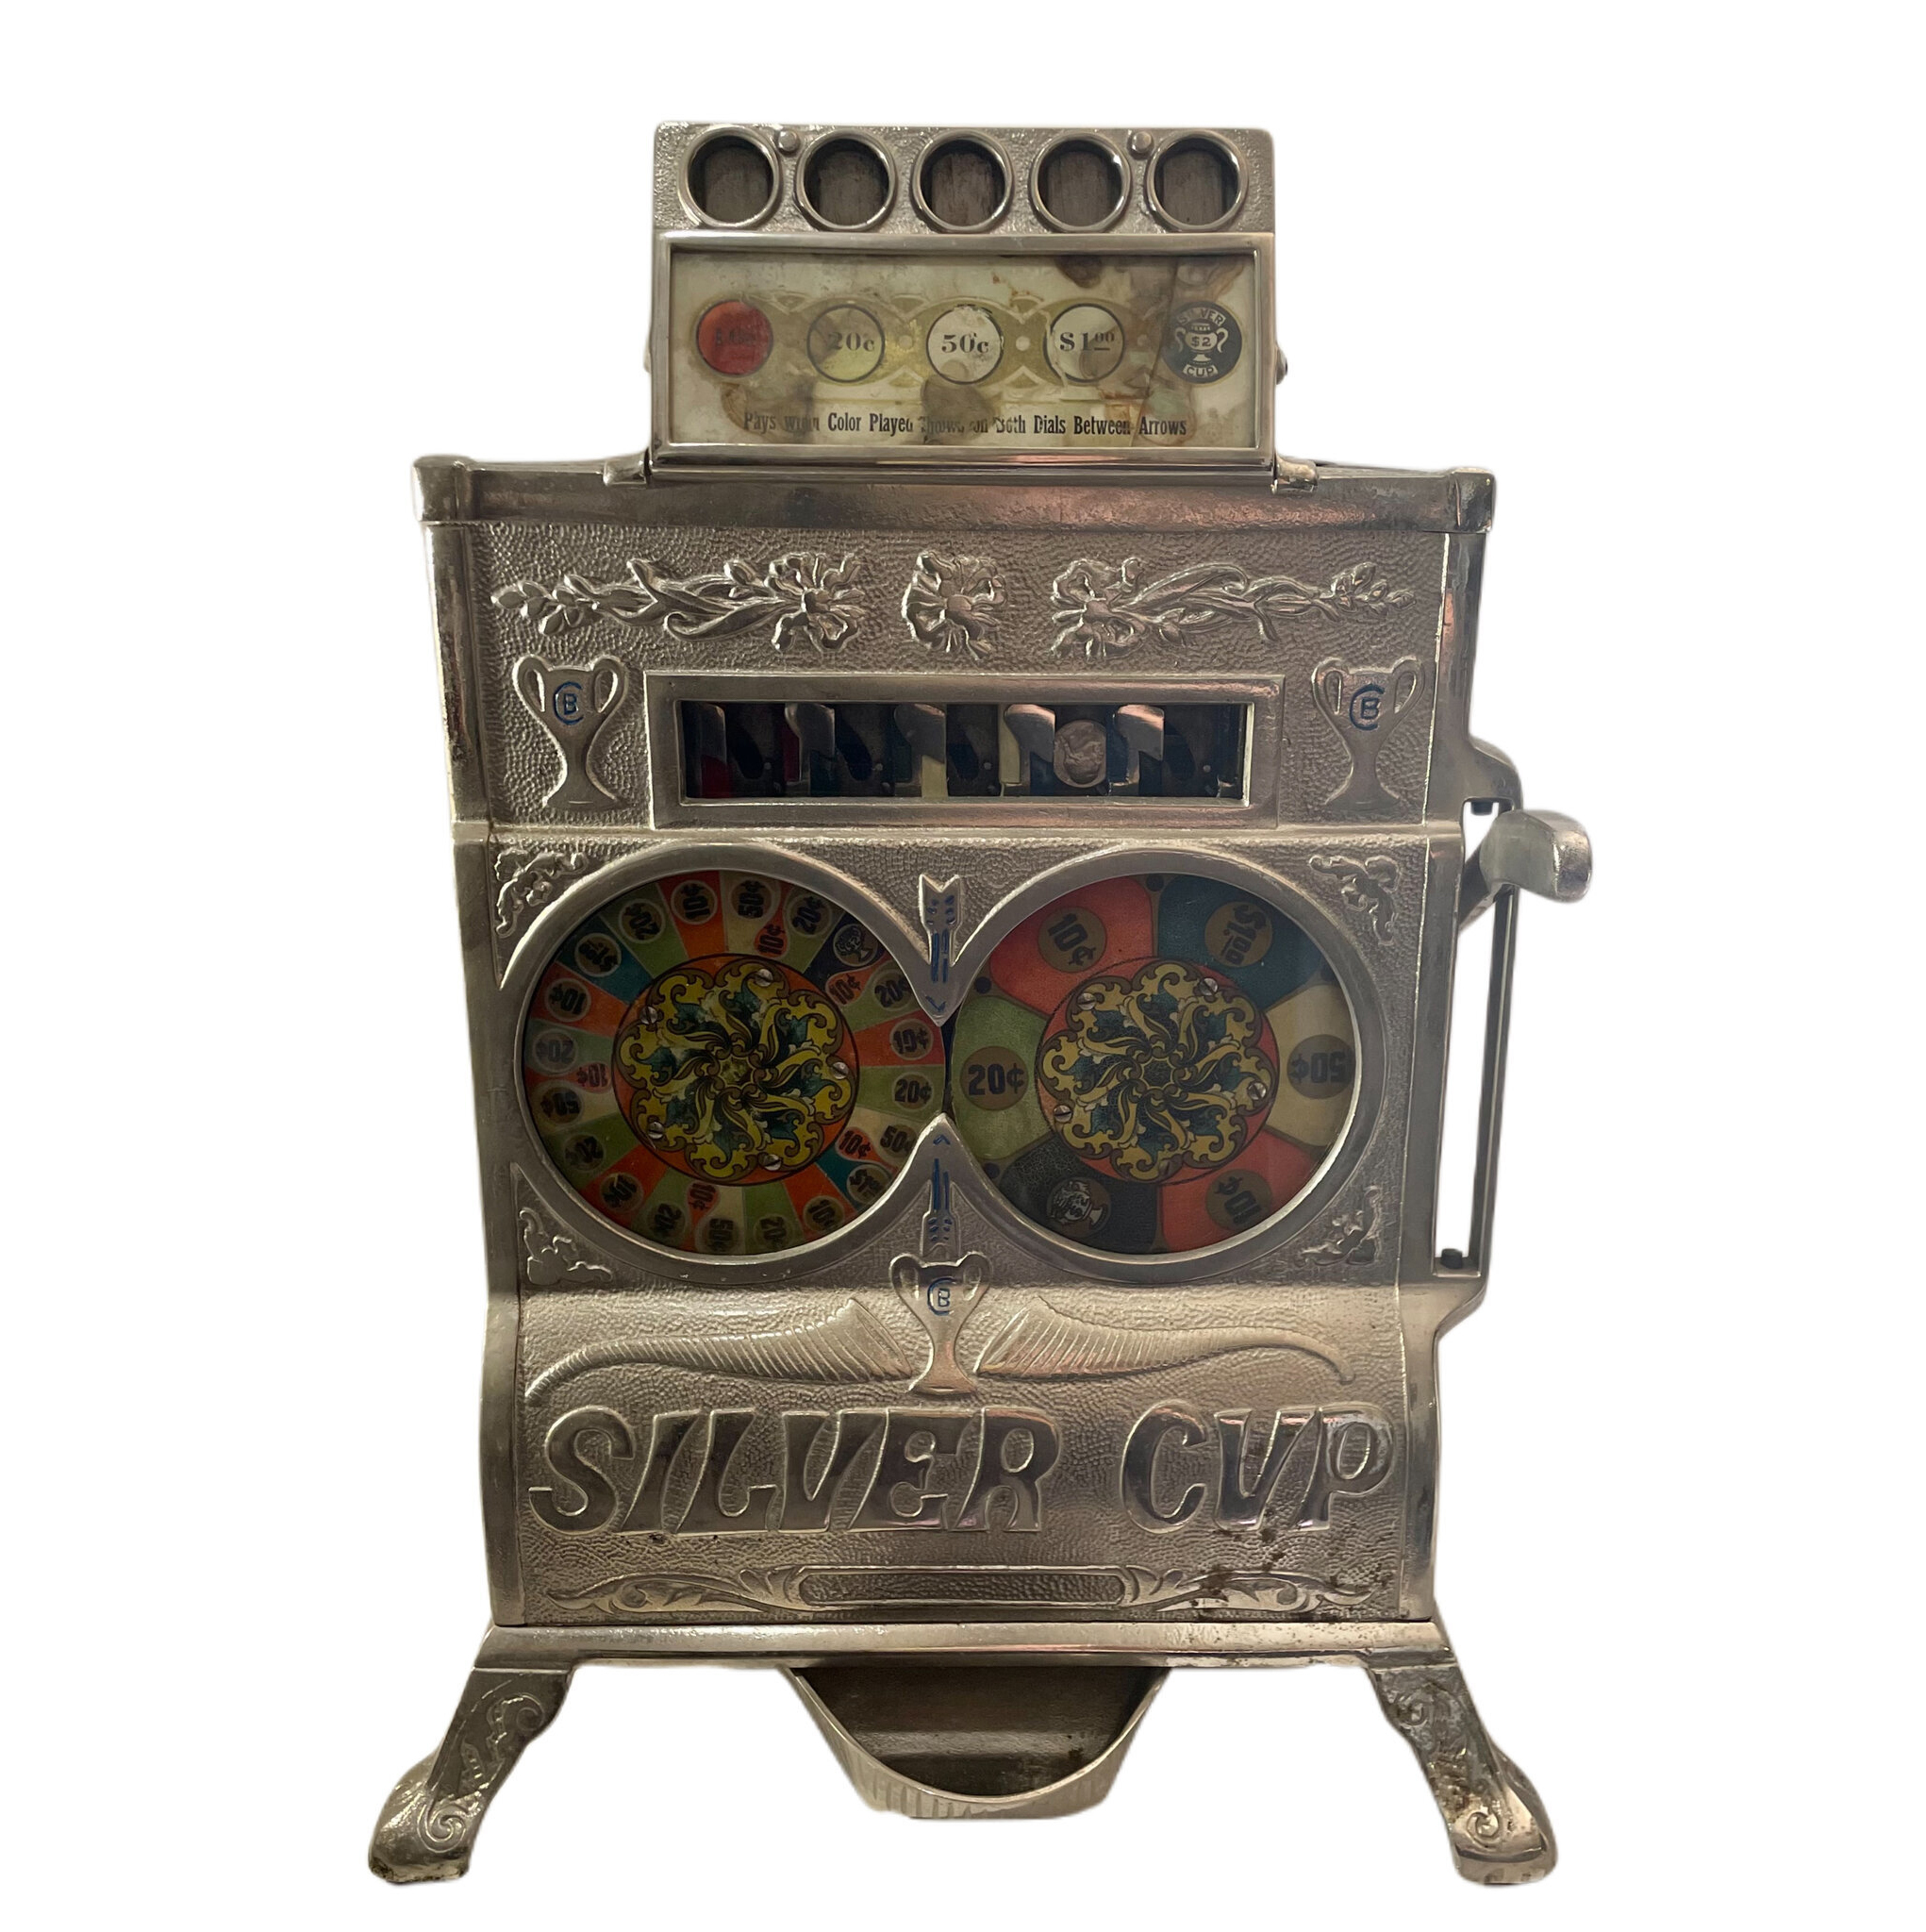 Caille Brothers Silver Cup slot machine, est. $12,000-$35,000